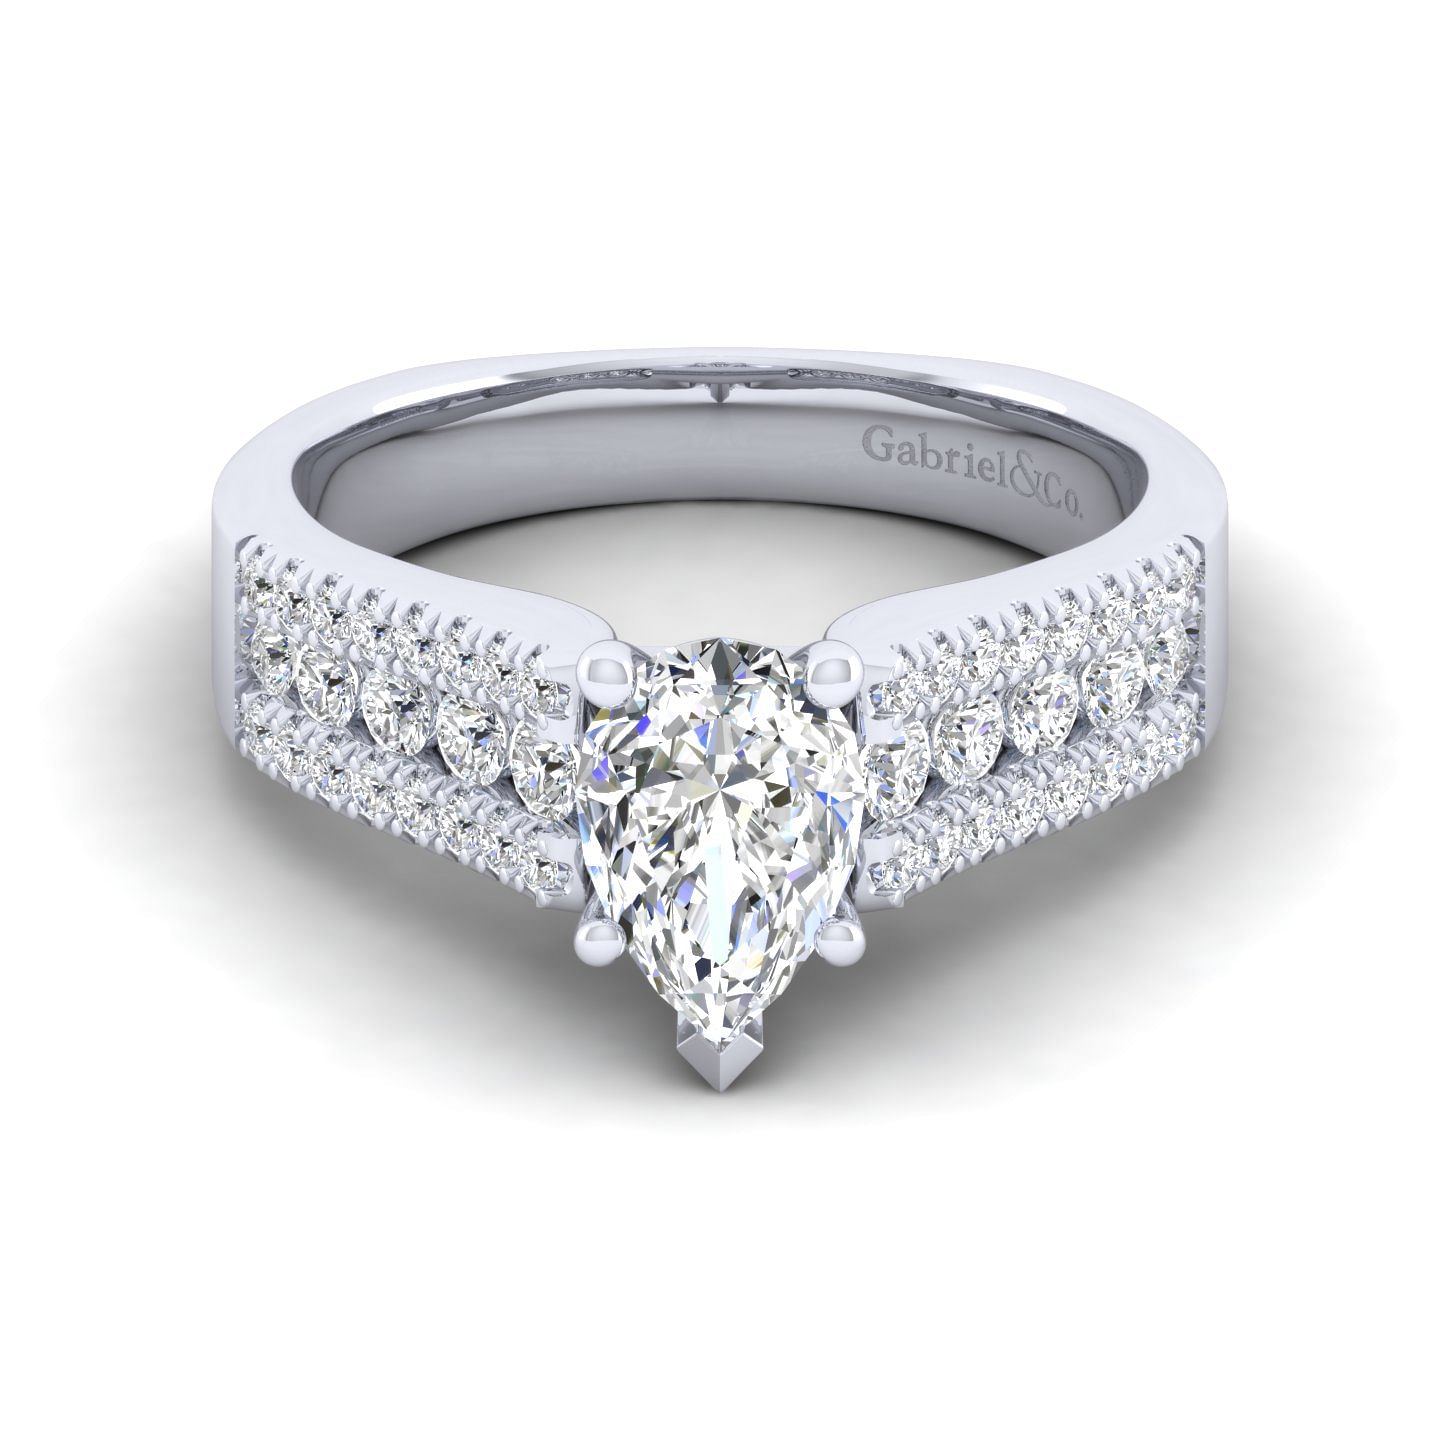 Channing - 14K White Gold Wide Band Pear Shape Diamond Engagement Ring